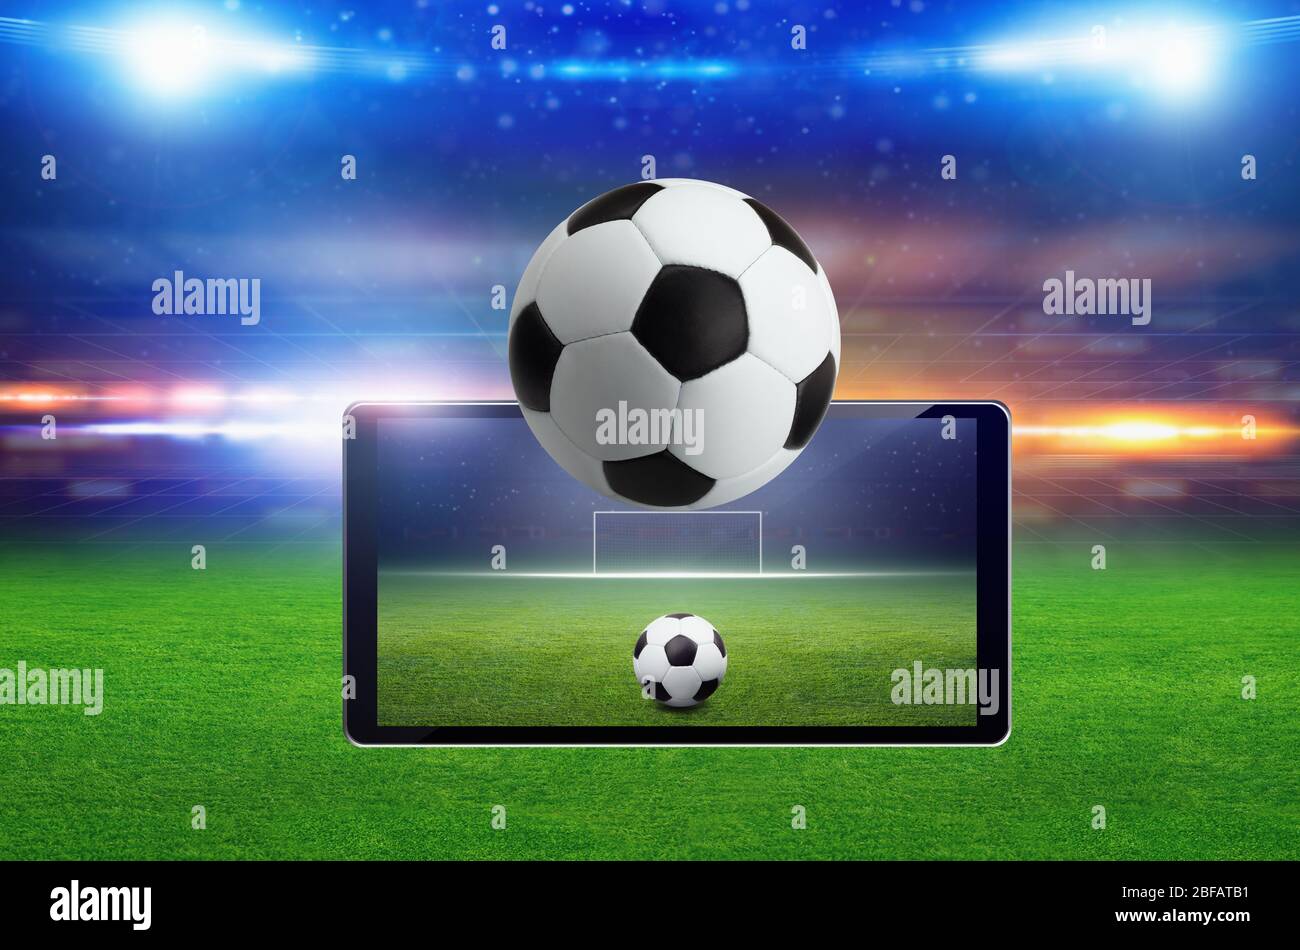 About Soccer 3D Live Wallpaper Google Play version   Apptopia